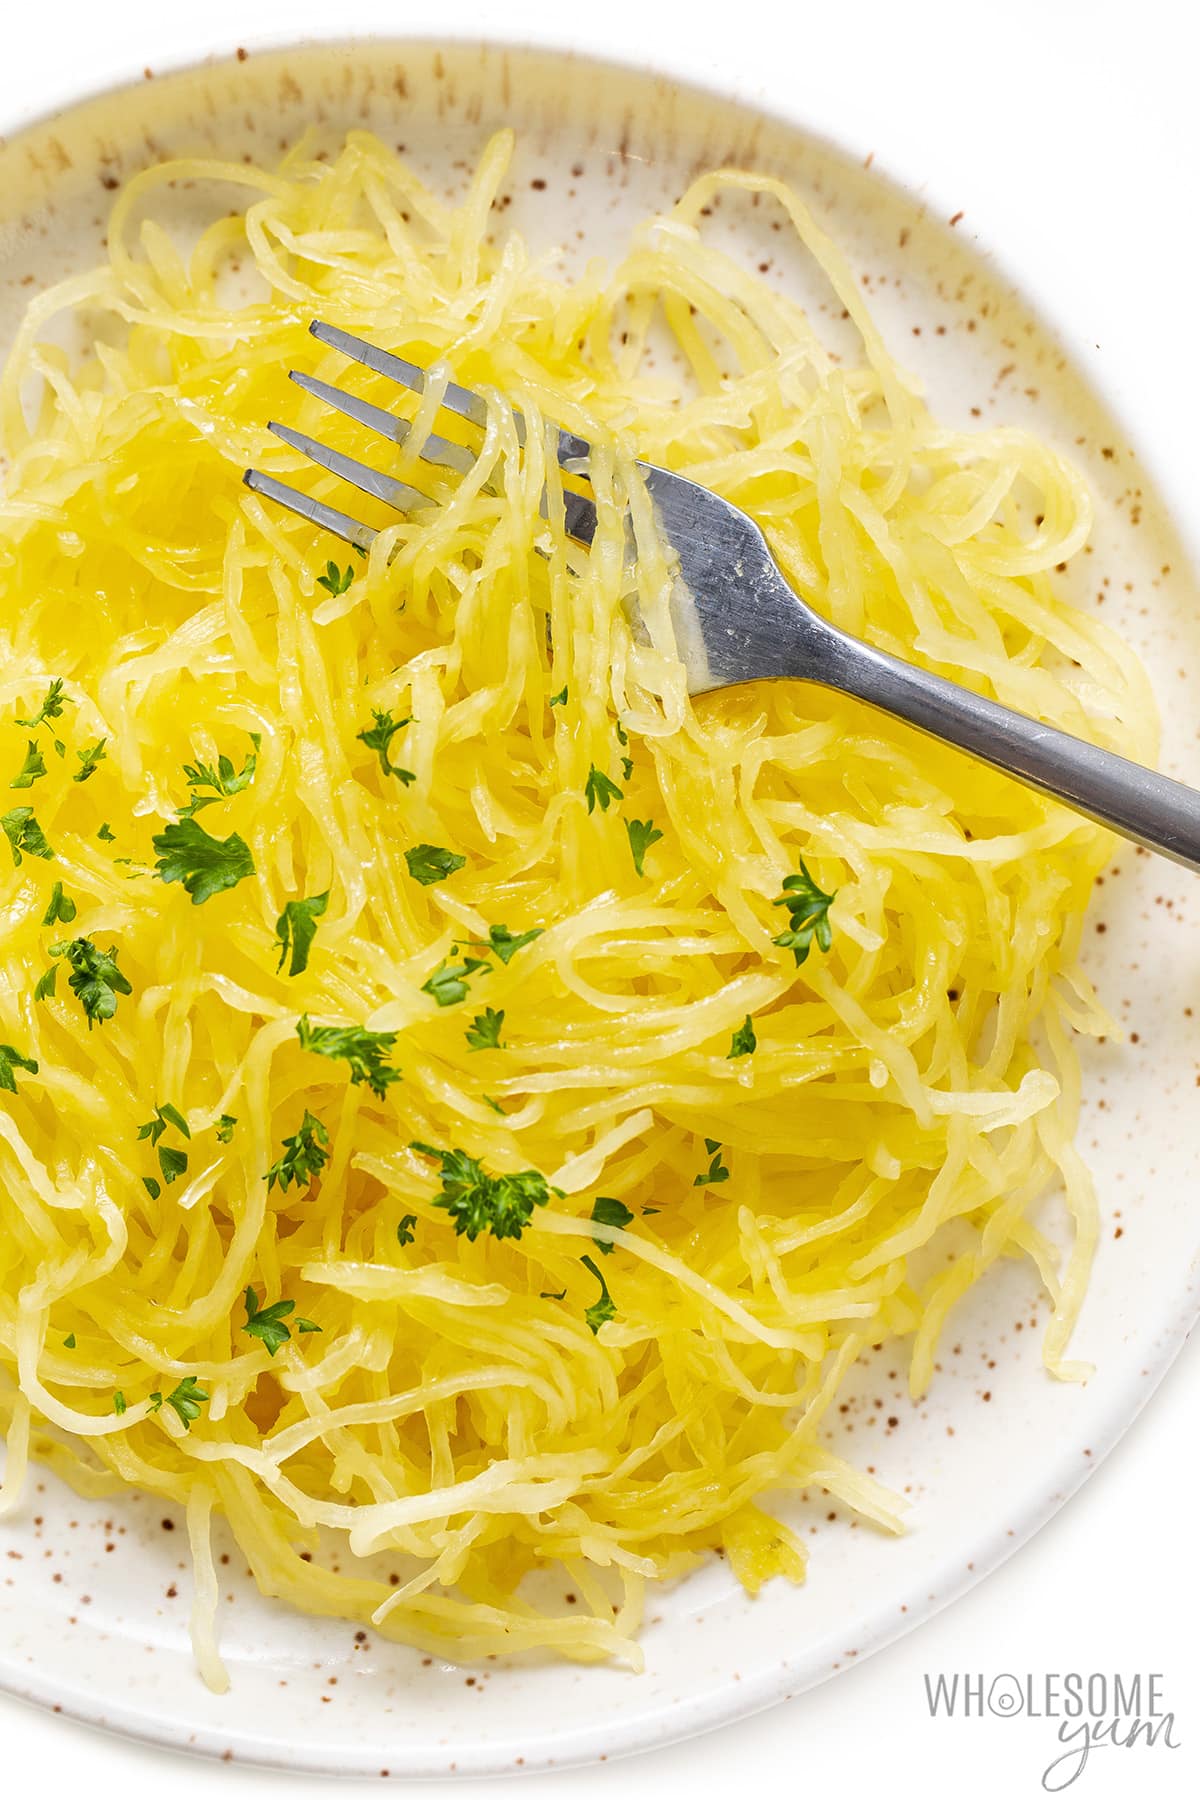 Baked spaghetti squash strands on a plate with a fork.